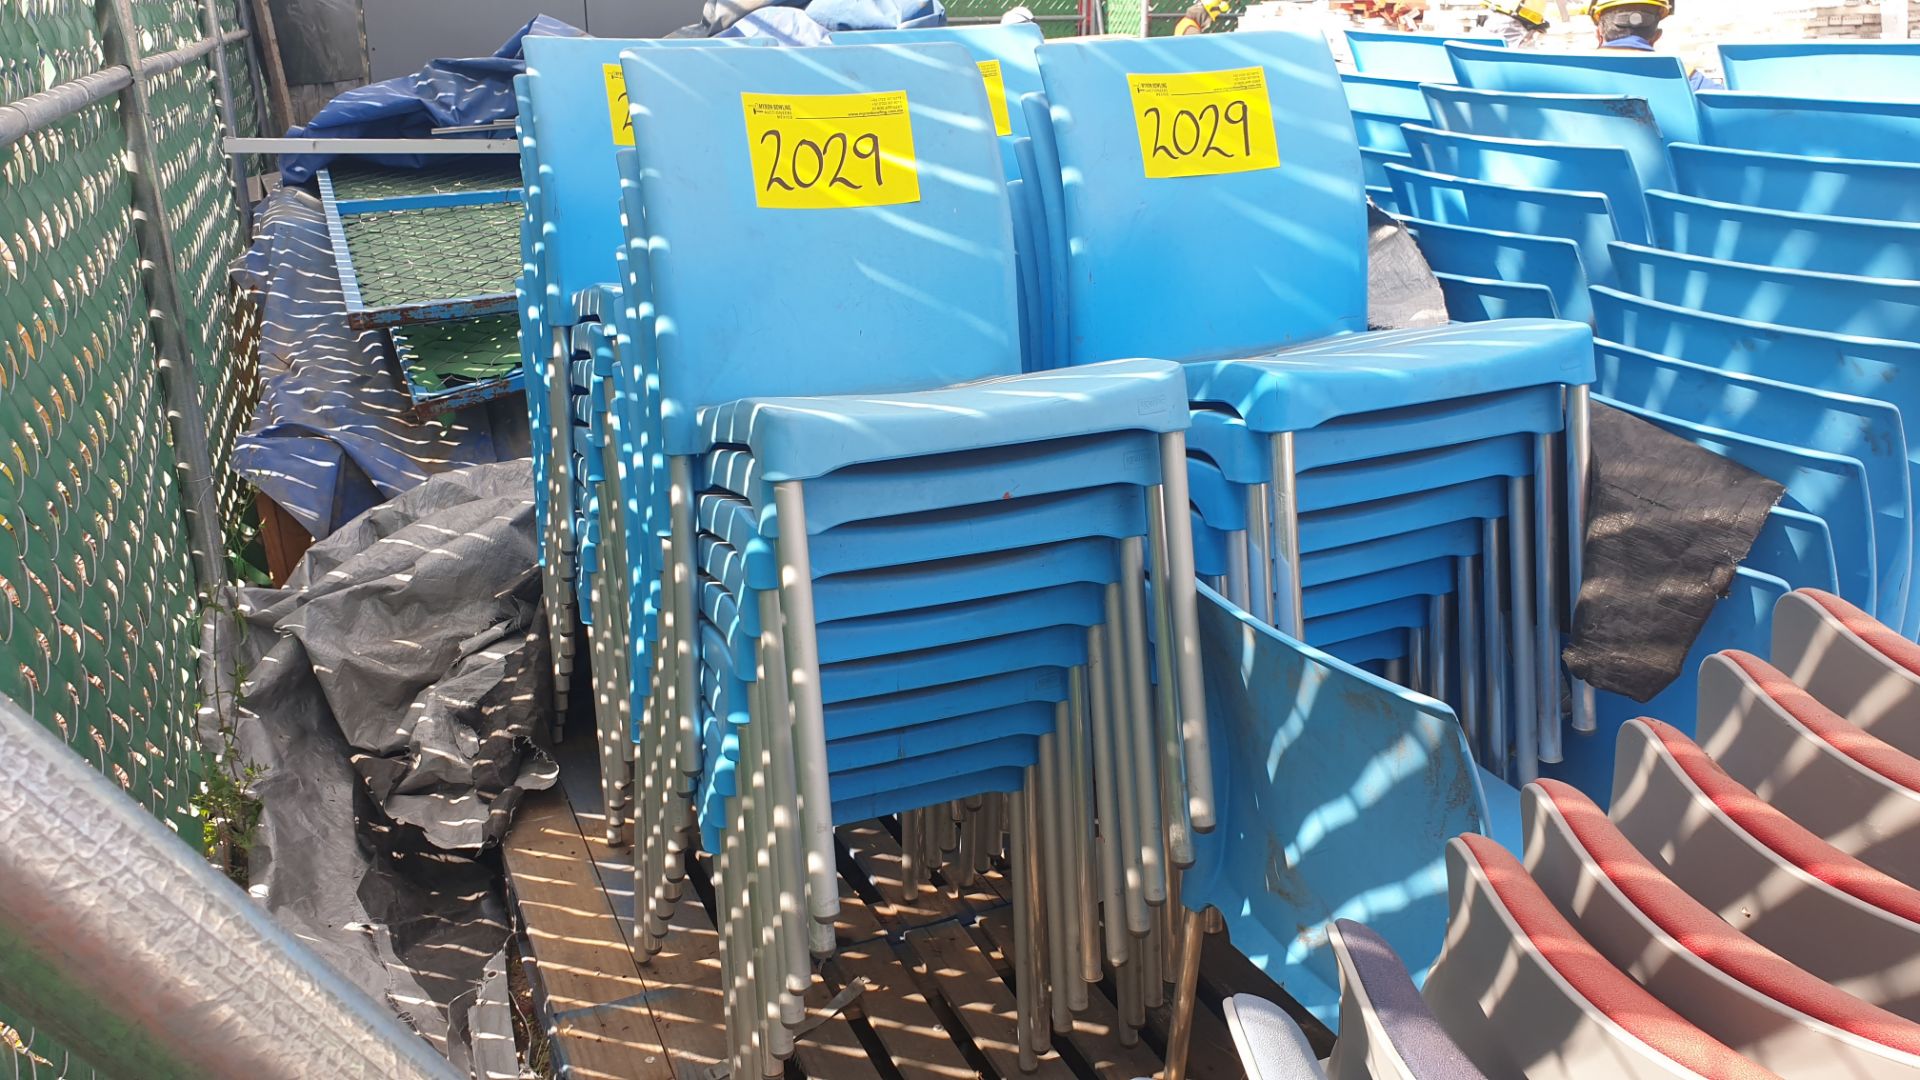 1 Lote of 40 blue plastic chairs, 7 metal chairs for office with backrest and upholstered seat - Bild 16 aus 22